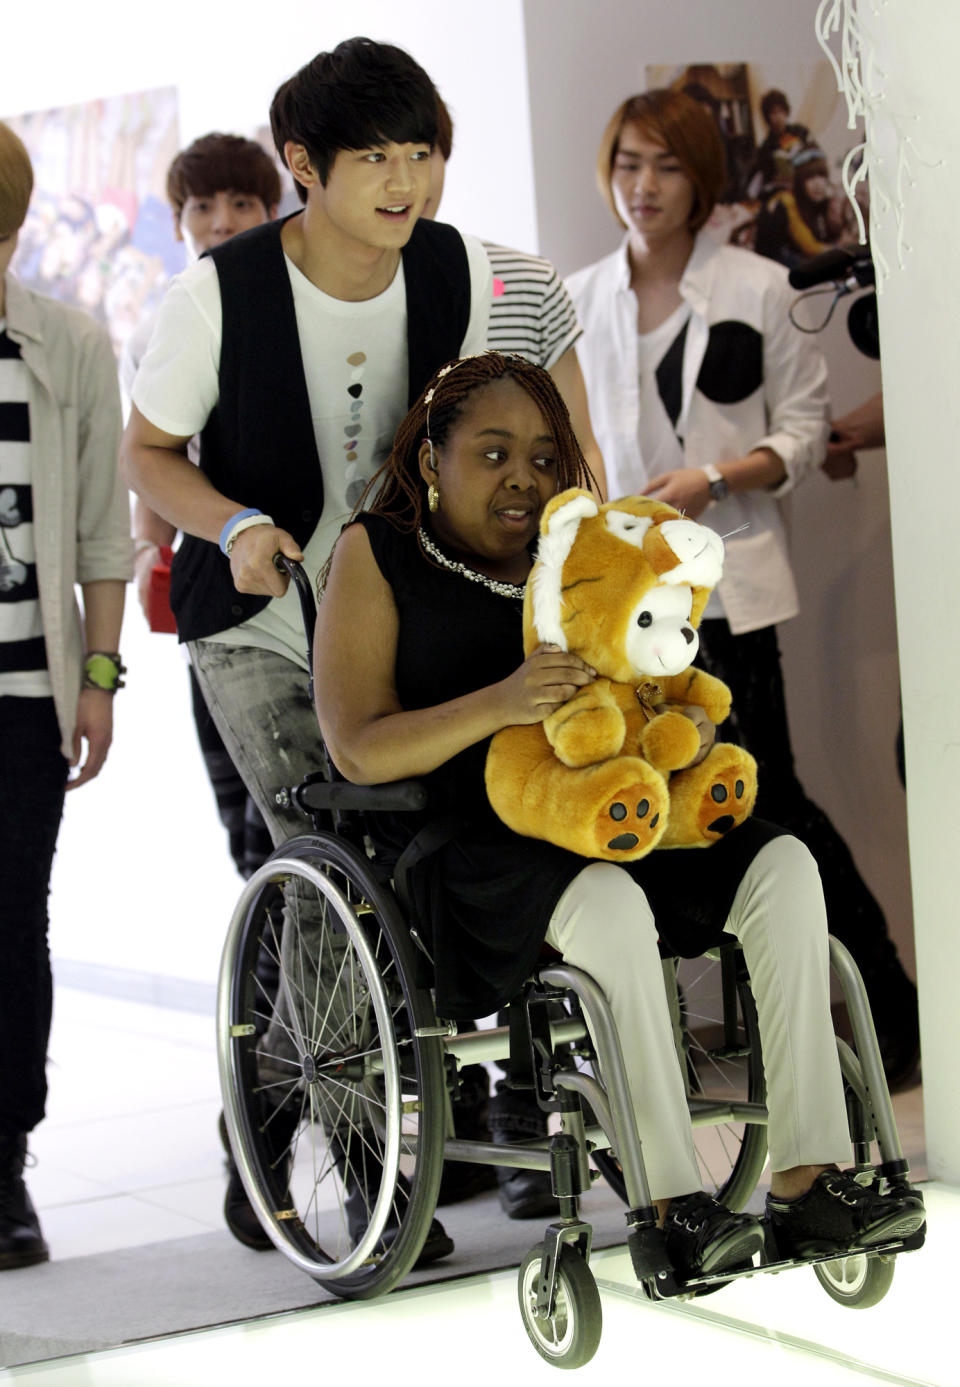 Donika Sterling from New York, in a wheelchair, gets help from Minho, a member of SHINee, on her arrival for meeting with the South Korean pop group in Seoul, South Korea, Wednesday, June 20, 2012. The 15 year-old American K-pop fan, who is suffering a disease that gradually causes loss of muscle tissue and slows down parts of the body, met and sang with the boy band she idolizes. (AP Photo/Lee Jin-man)